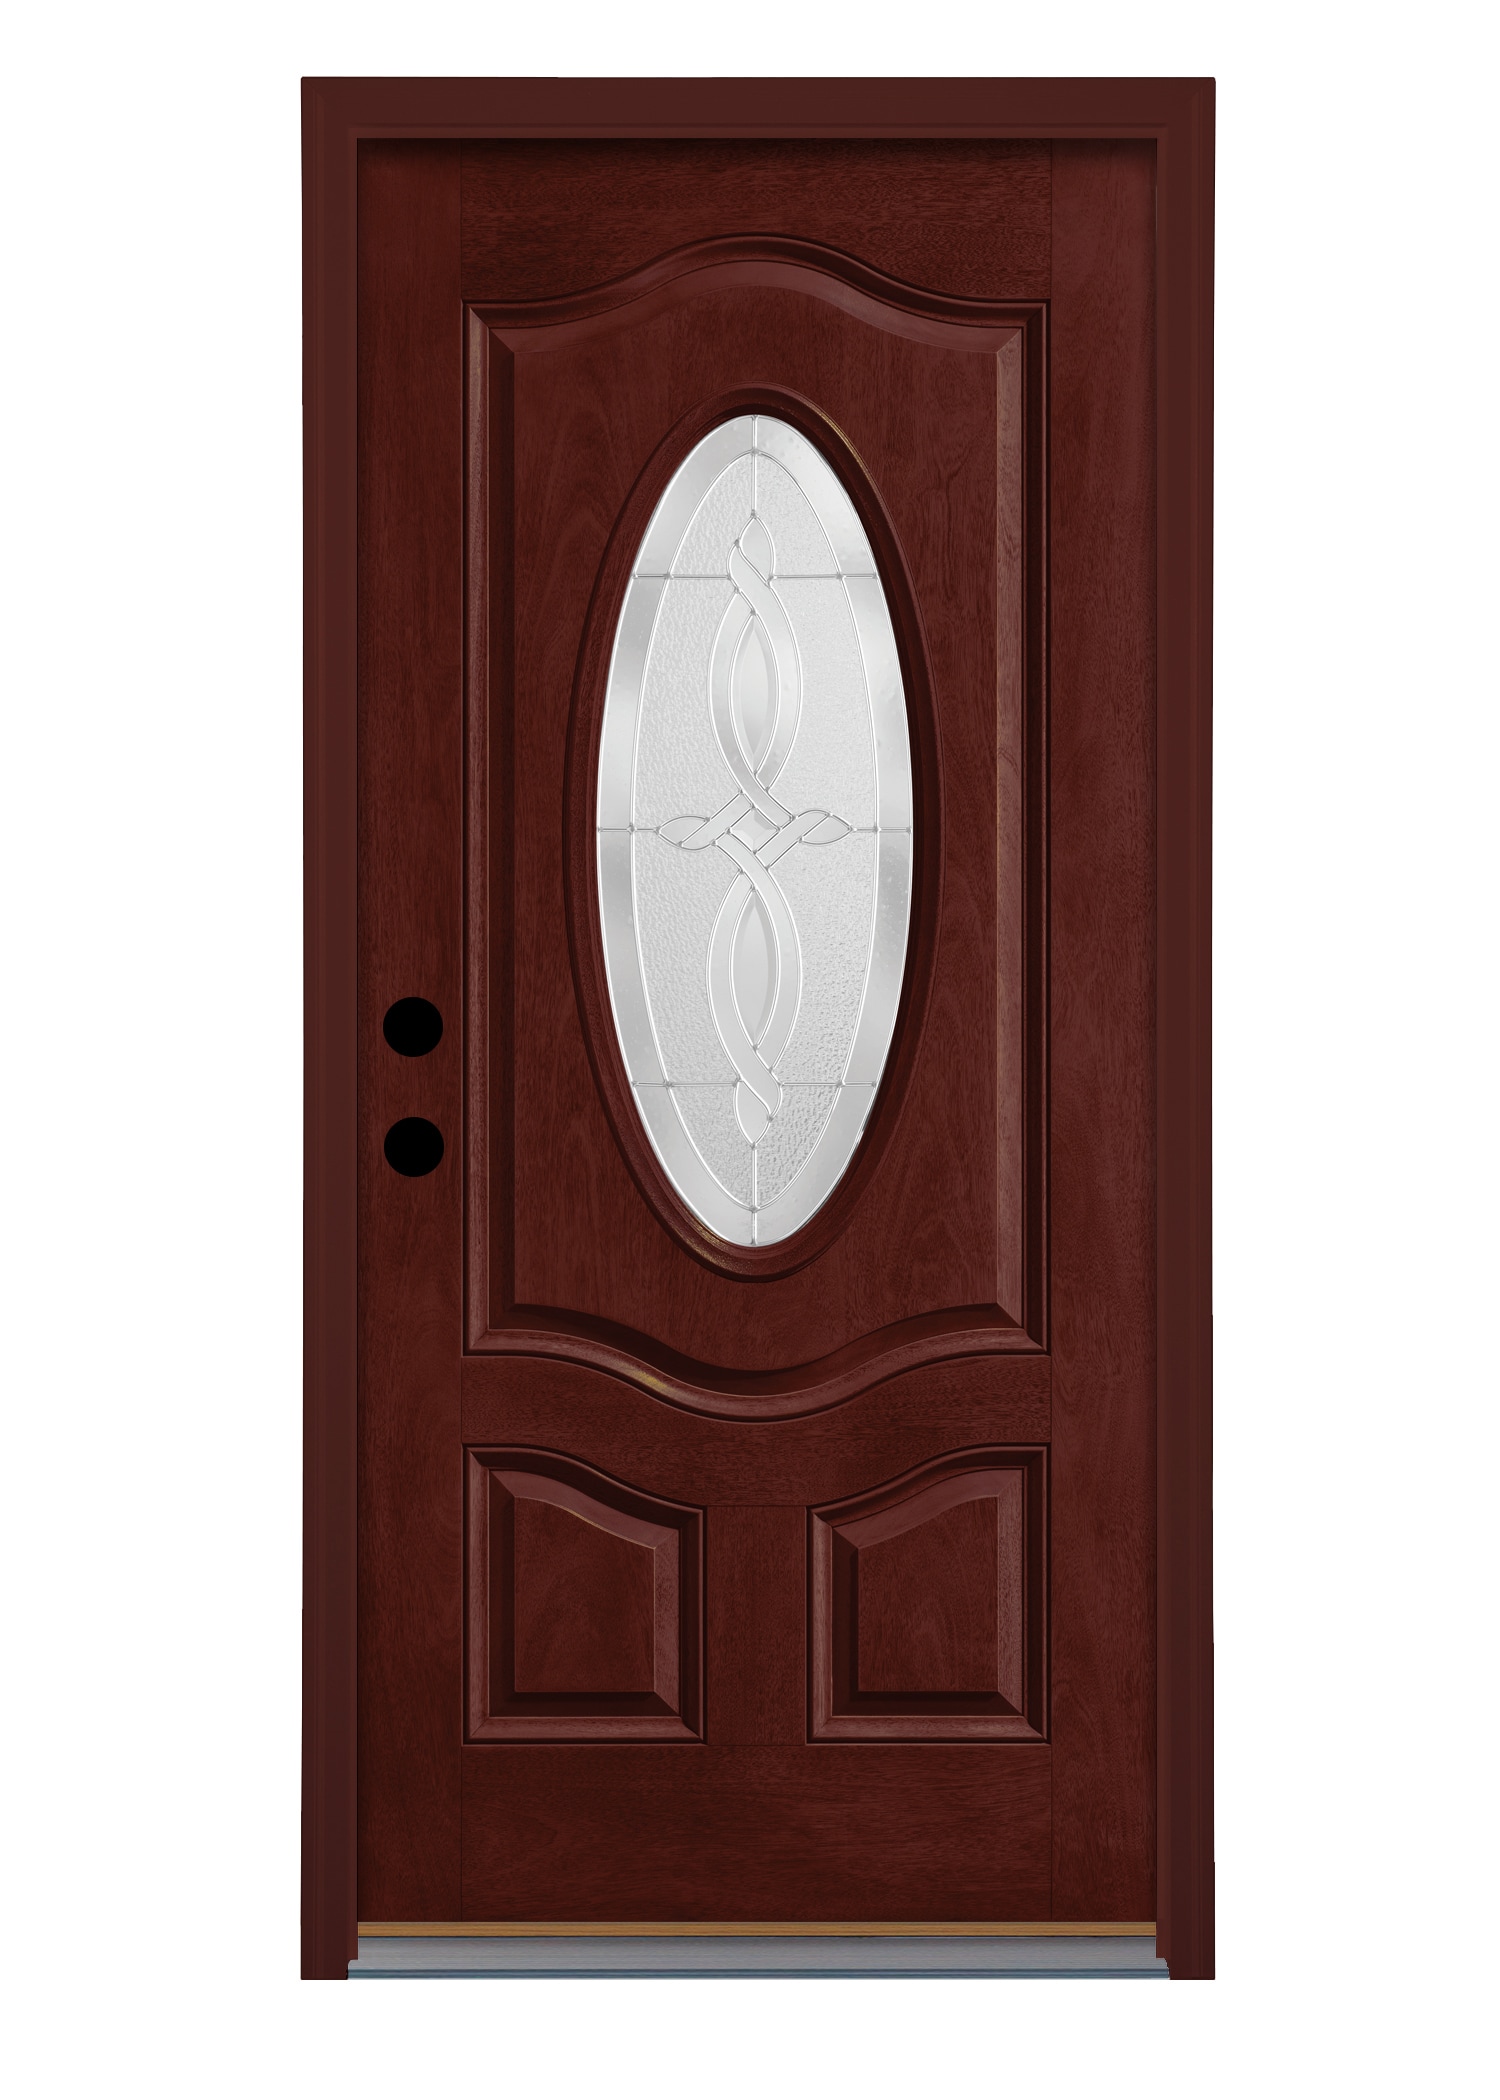 34 in. x 80 in. 3/4 Oval Lite Wendover Black Cherry Stained Fiberglass  Prehung Right-Hand Inswing Front Door